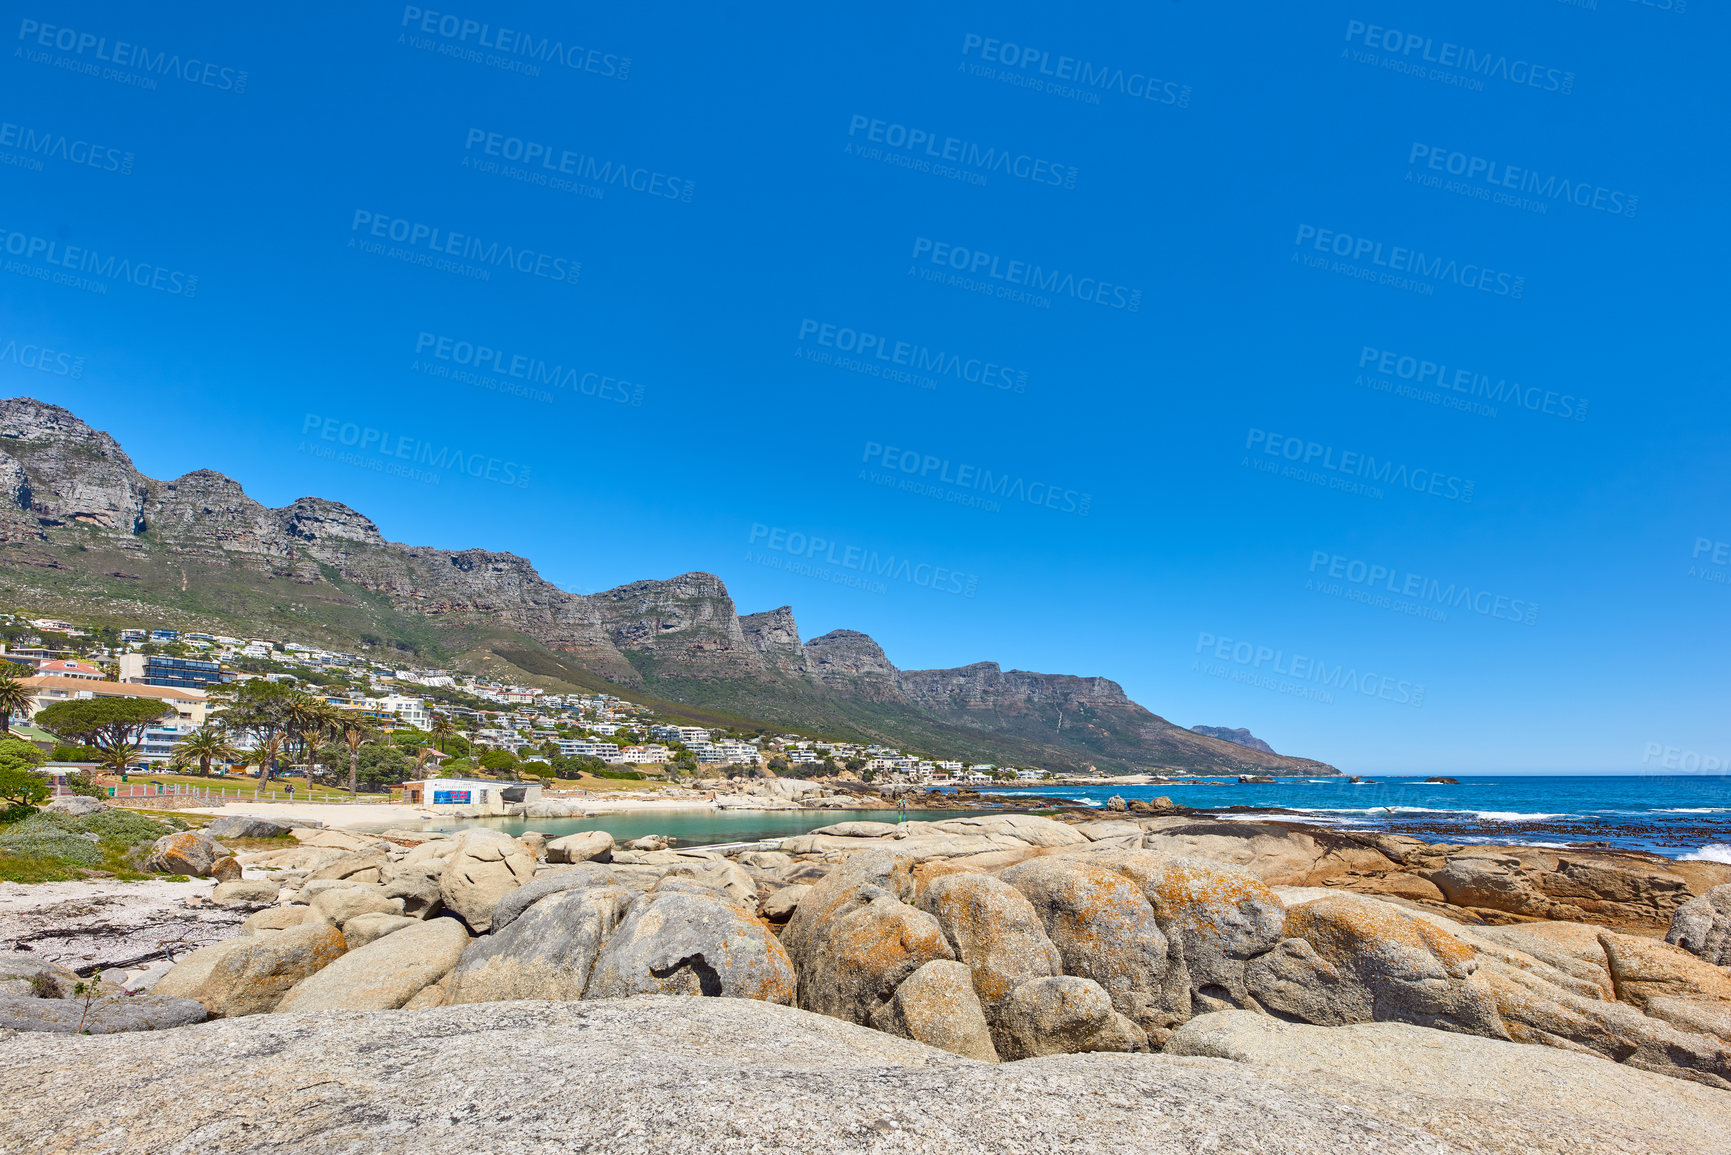 Buy stock photo Landscape of a summer holiday destination with a unique mountain range near a rocky beach in South Africa. View of the twelve apostles in Cape Town and a calm ocean against a bright blue horizon.